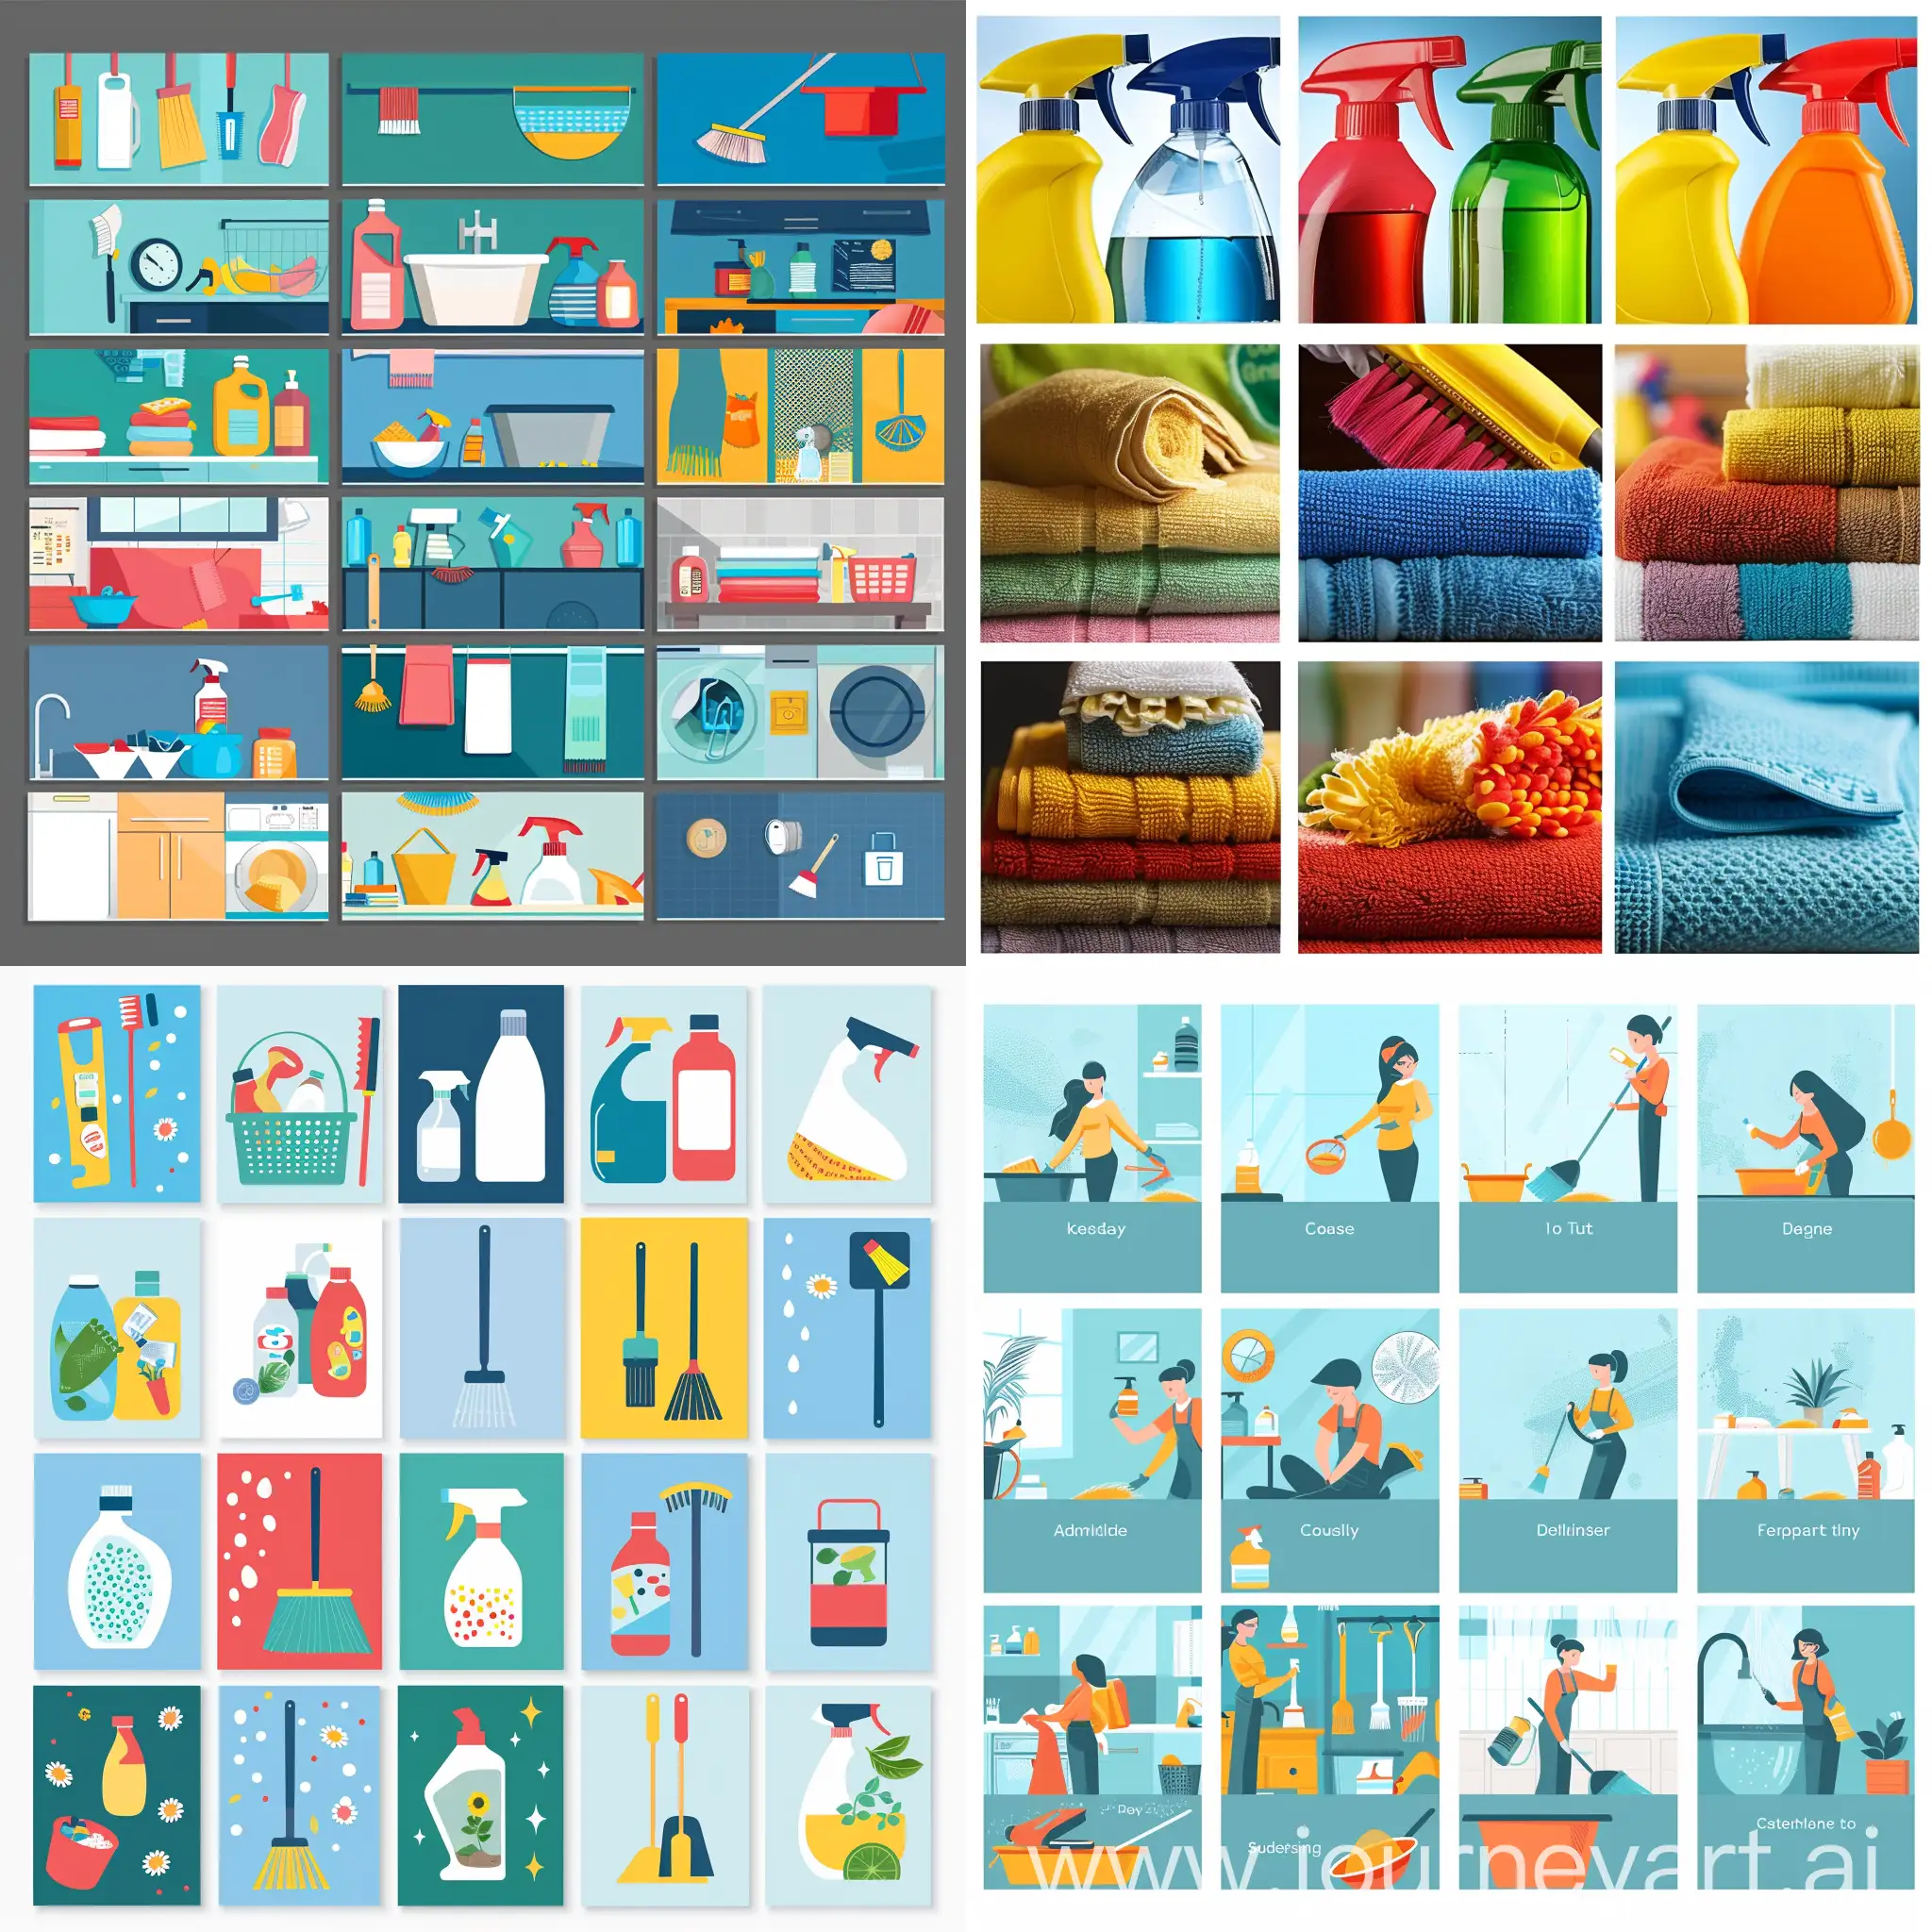 Ten-Vibrant-Banners-Featuring-Cleaning-Scenes